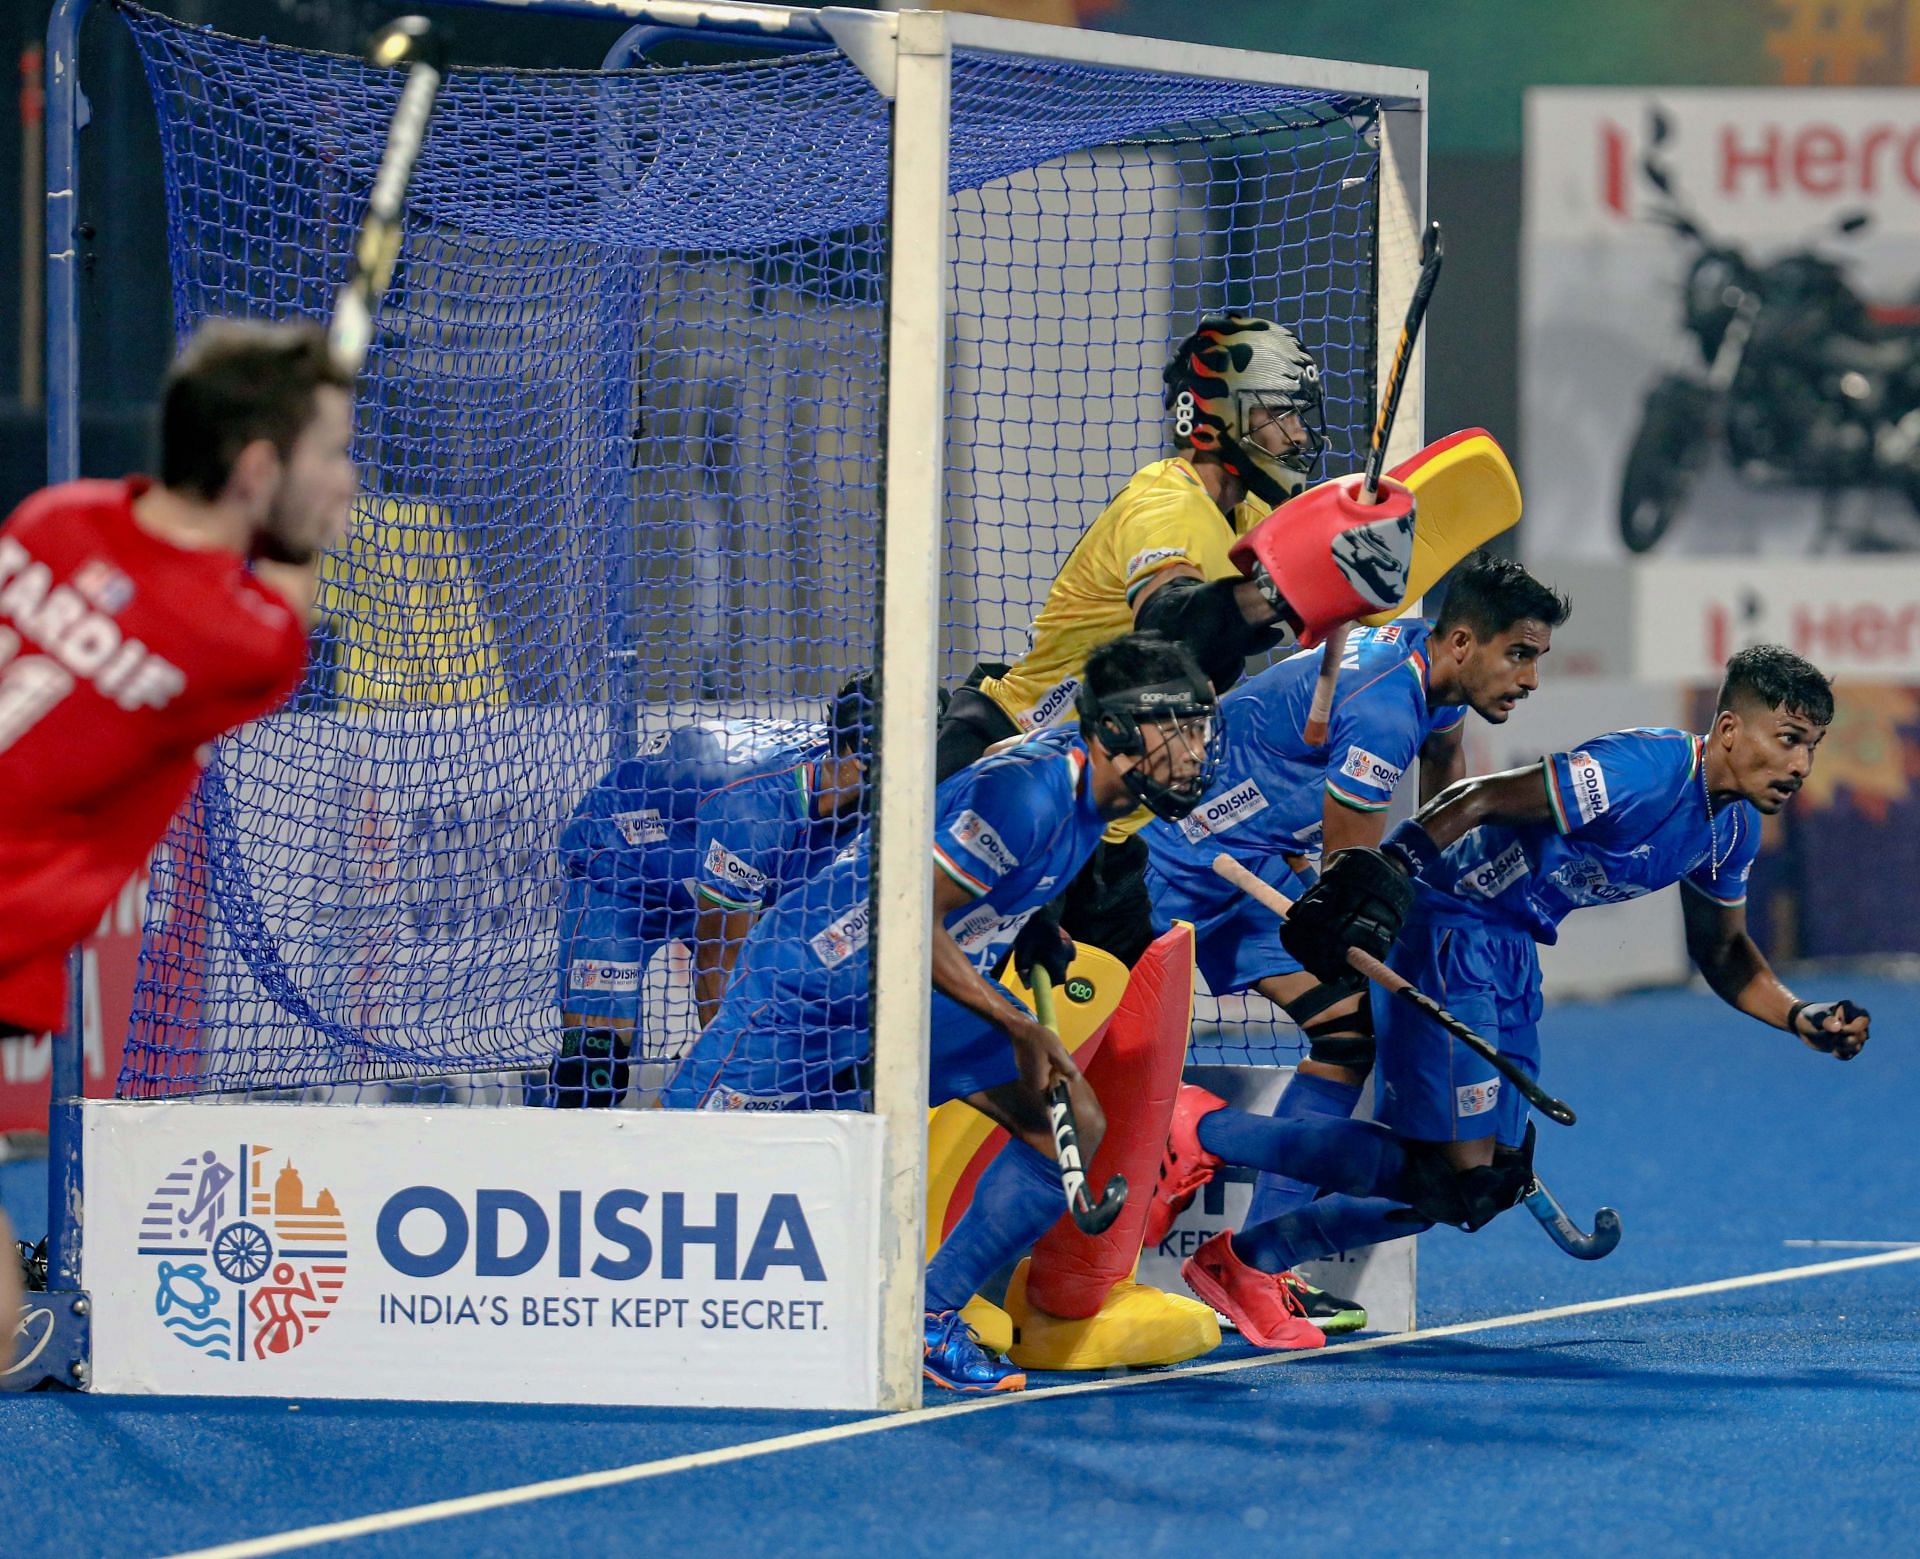 Indian players during a penalty corner (Image Courtesy: Hockey India Twitter)